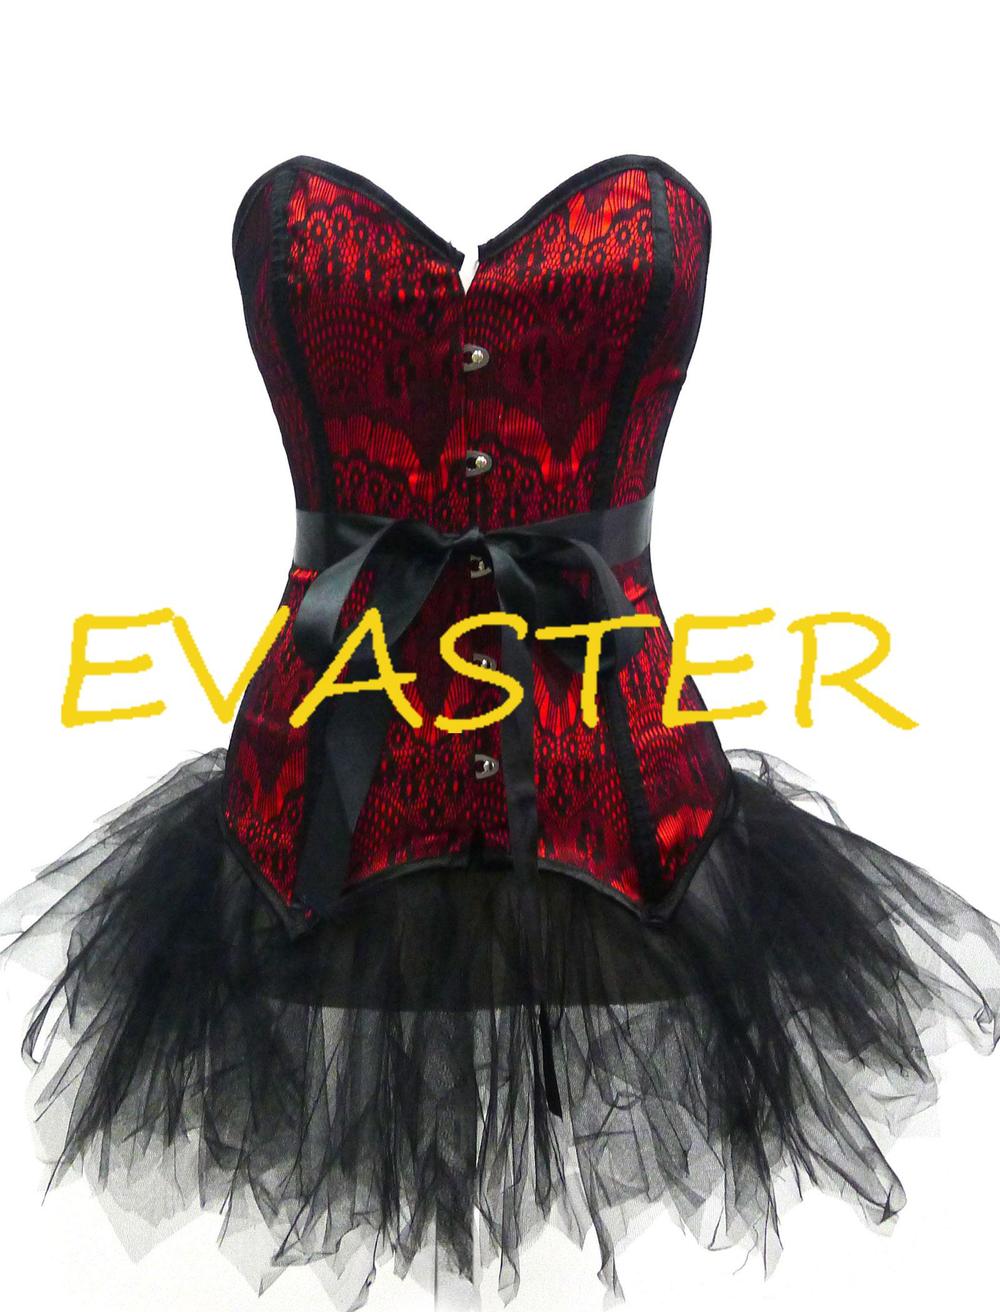 Fashionable Attractive Strapless Red Lace Fantasy sexy woman corset bustier